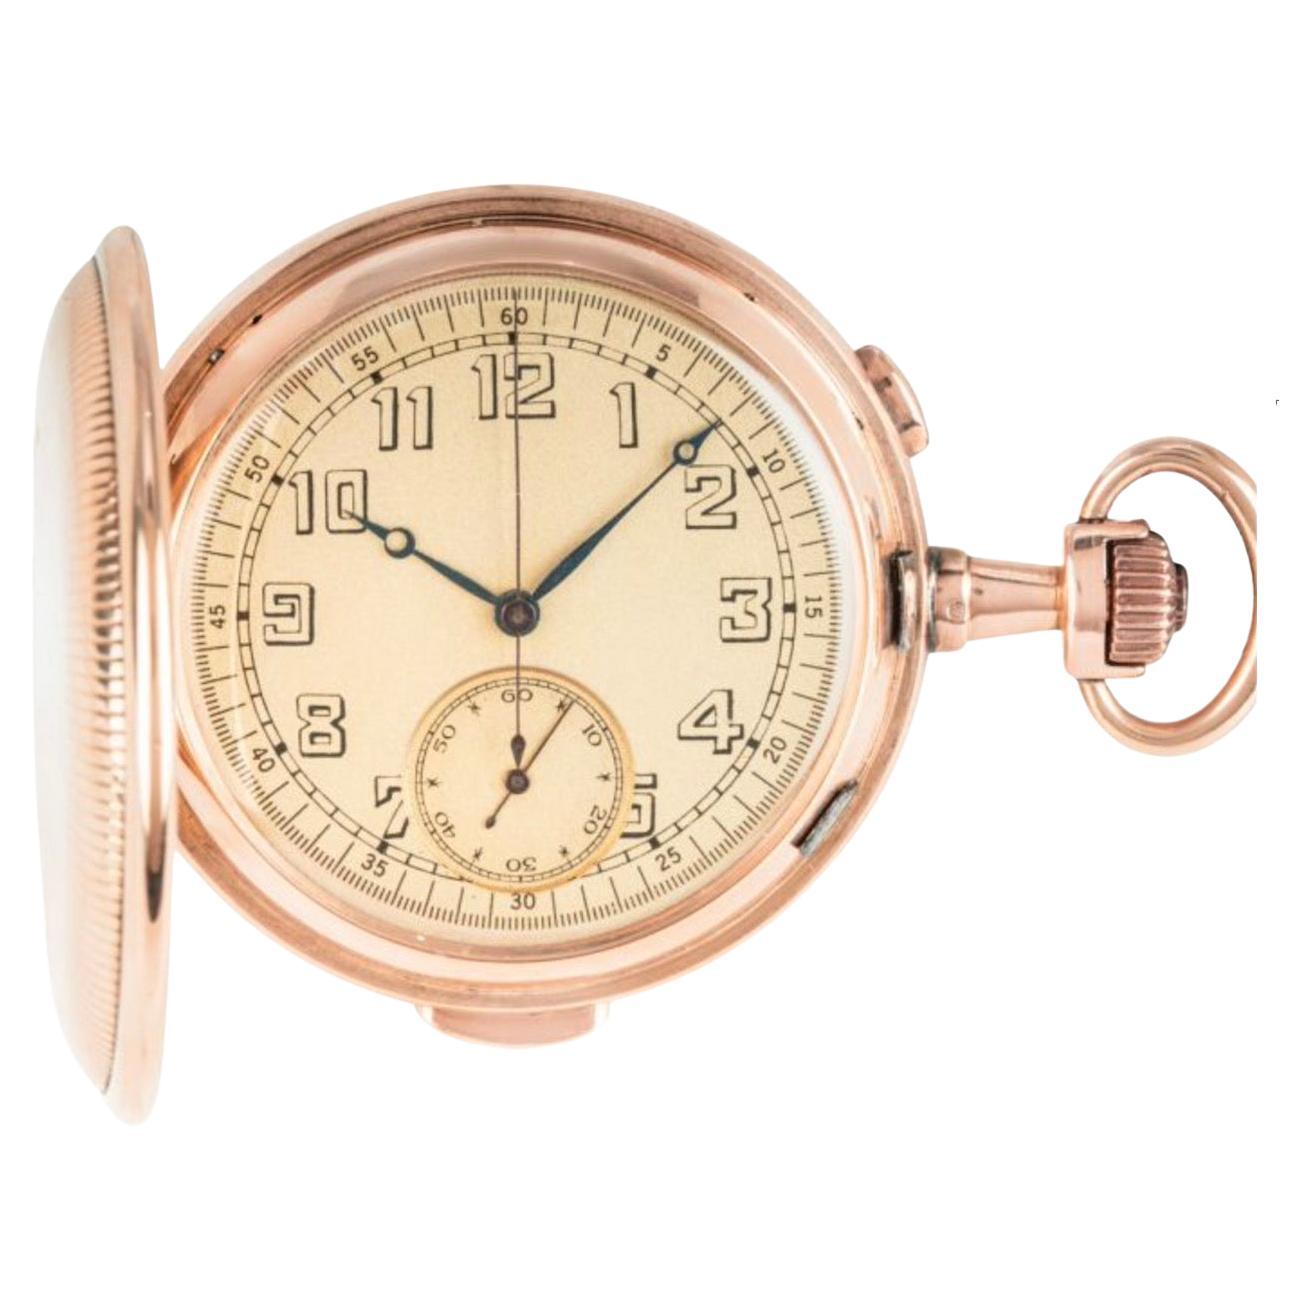 Invicta Hunter 14CT Rose Gold Minute Repeated Chronograph Keyless Pocket Watch